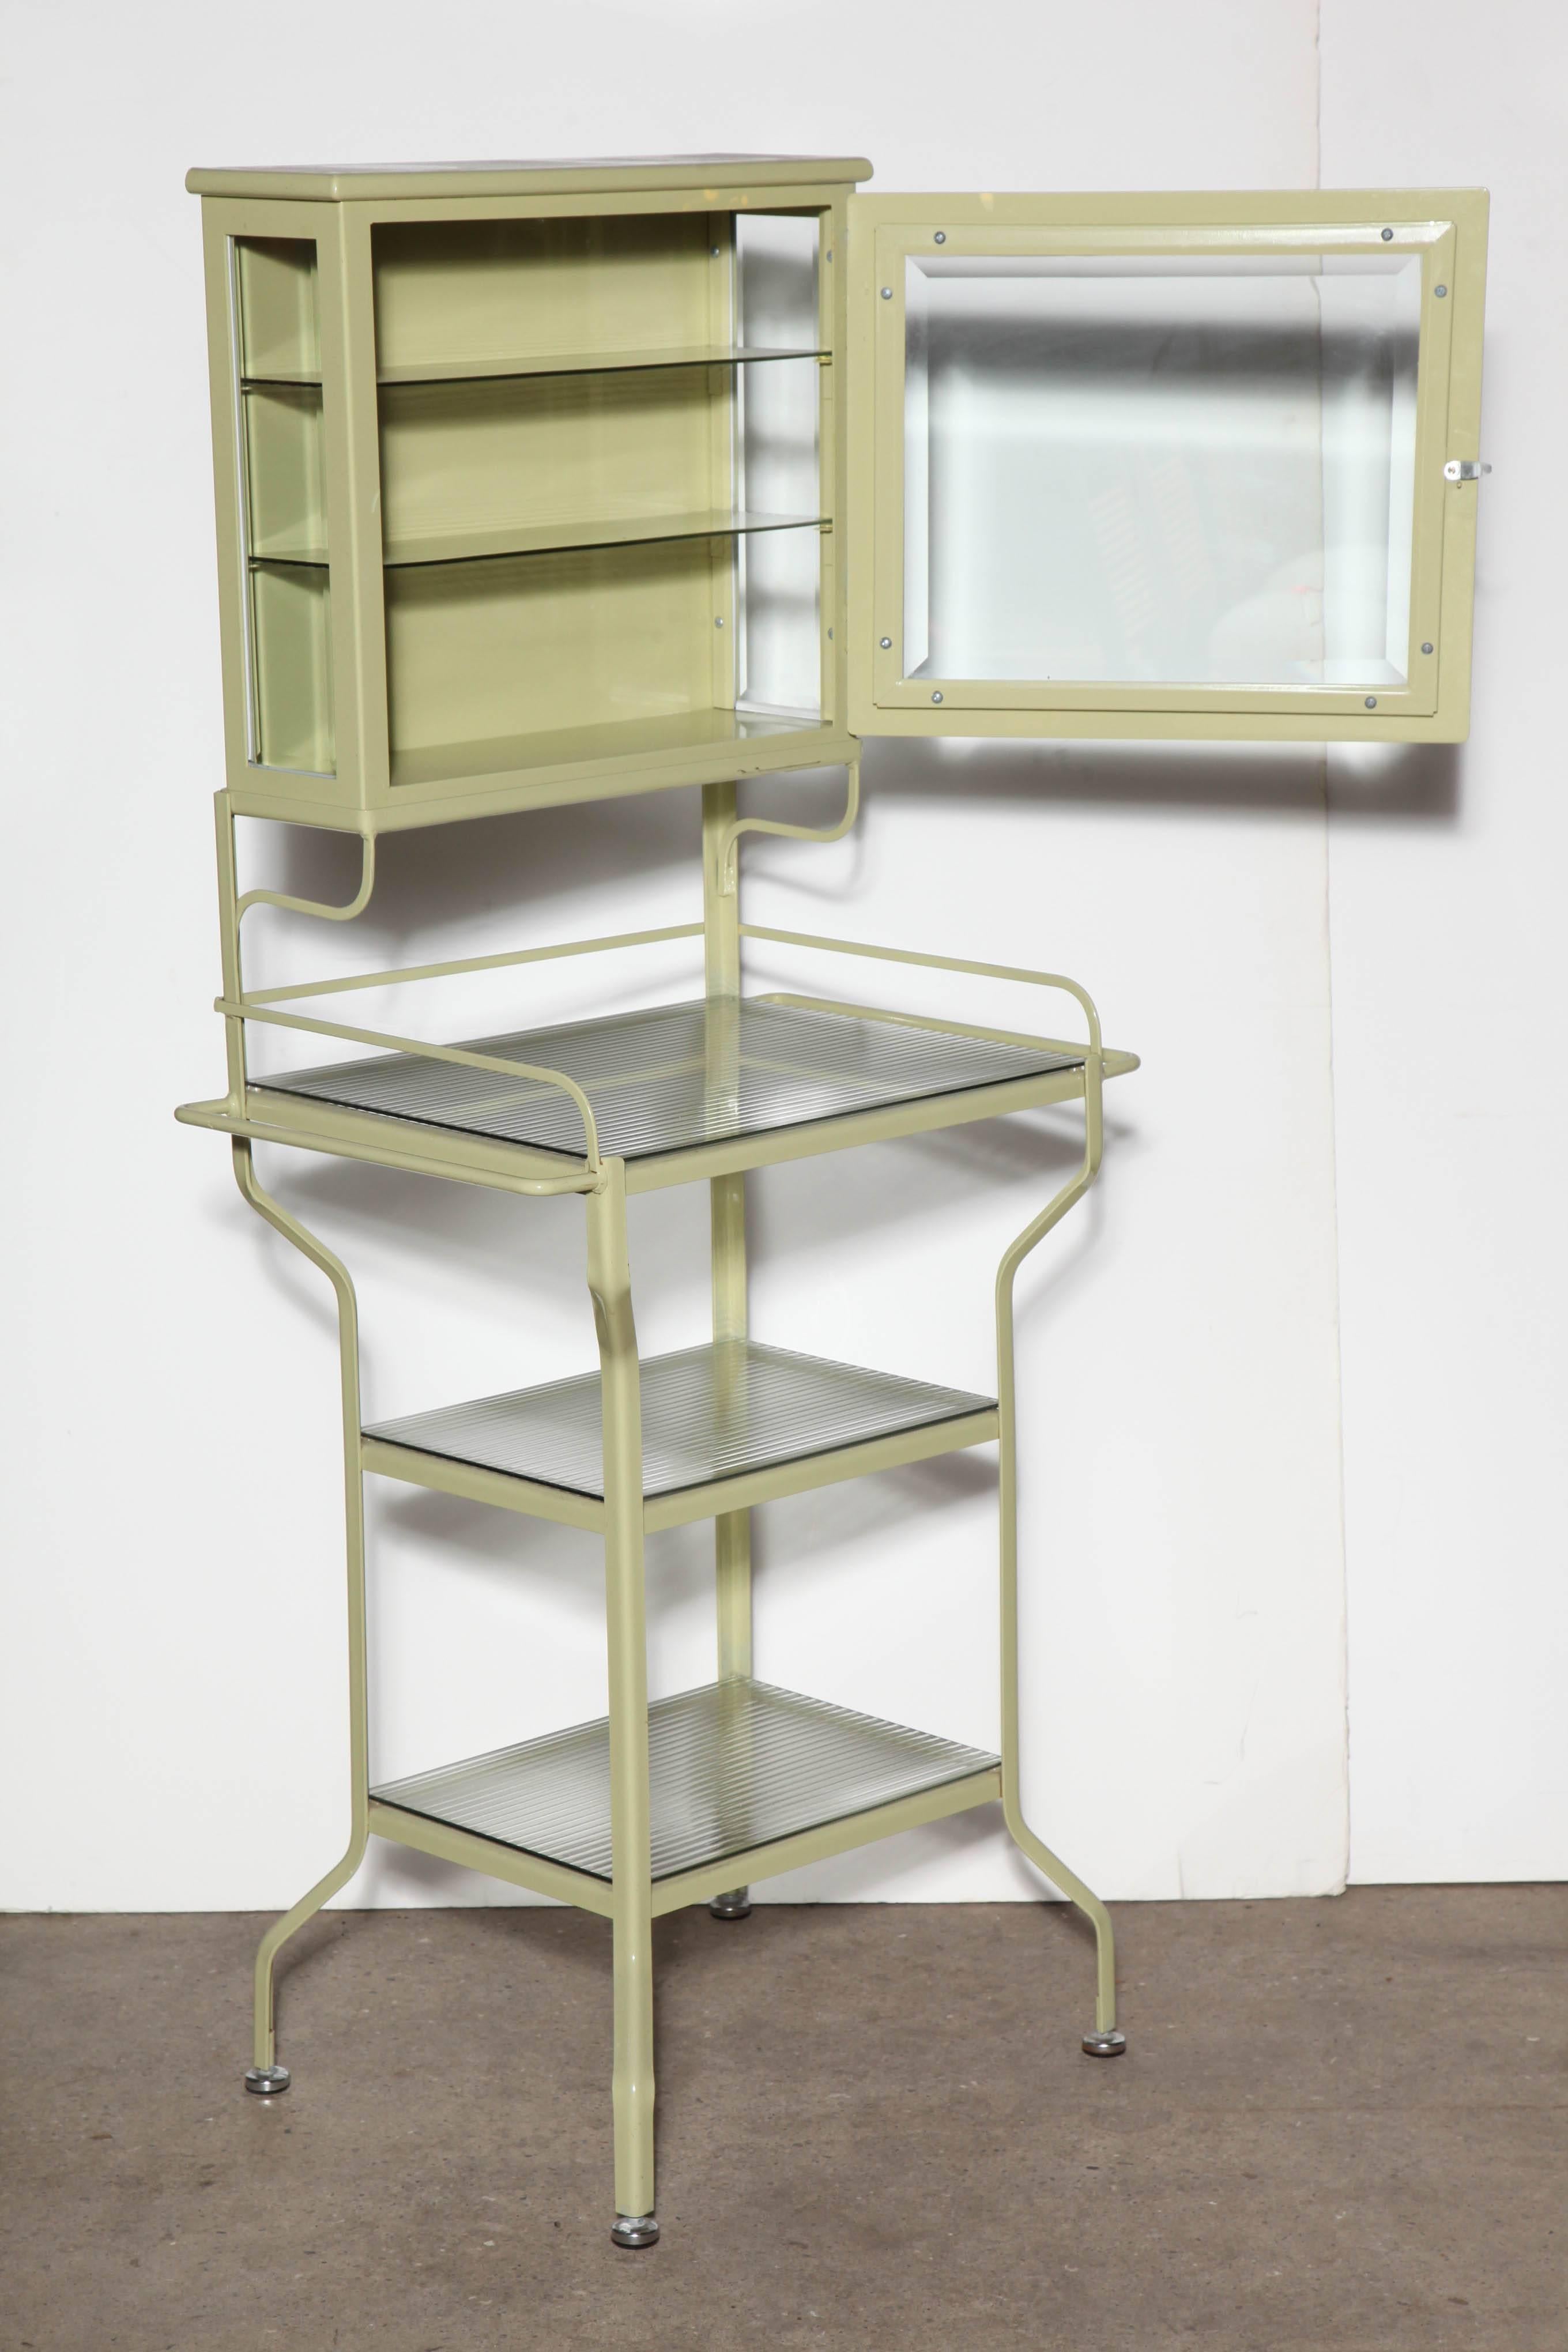 American Pale Green Enamel & Glass Storage Cabinet with Five Optical Glass Shelves, 1920s